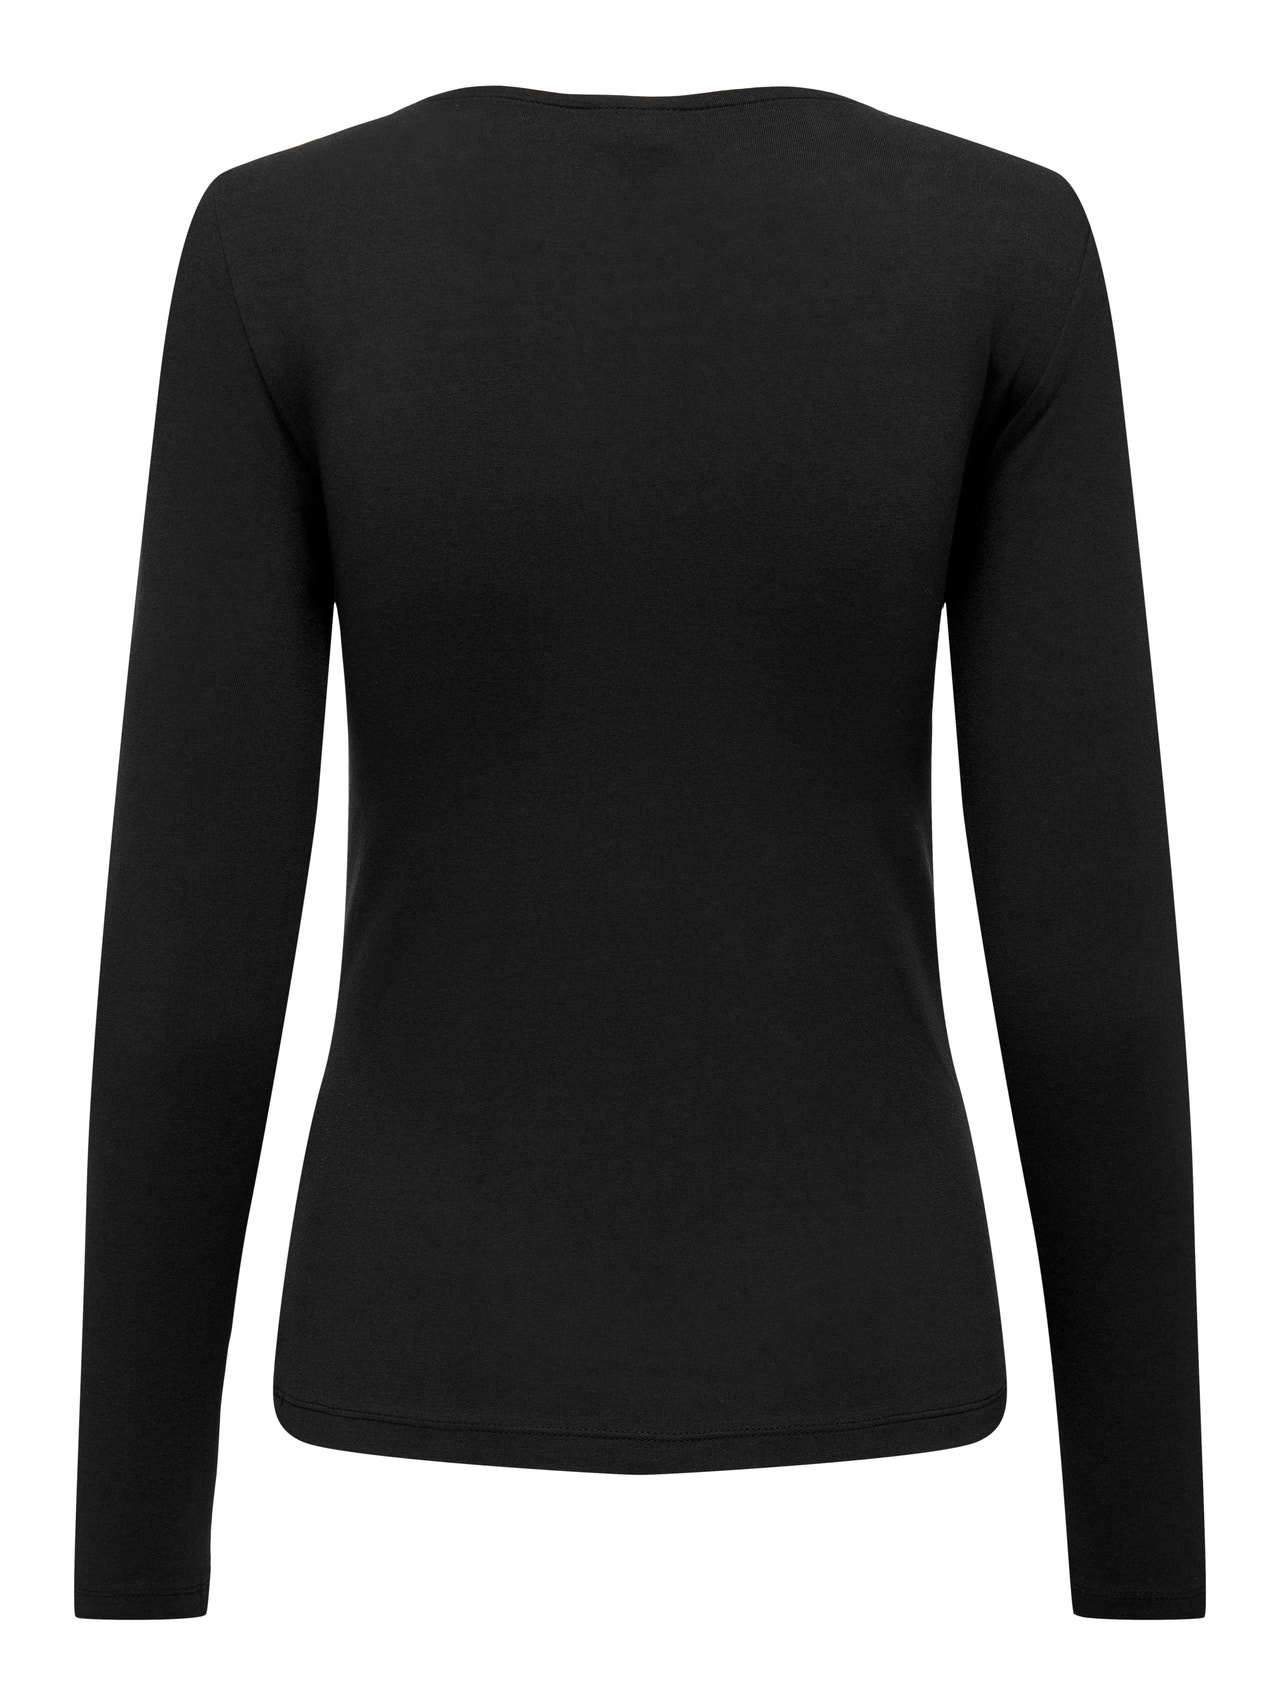 ONLY Tight fitted top -Black - 15300684